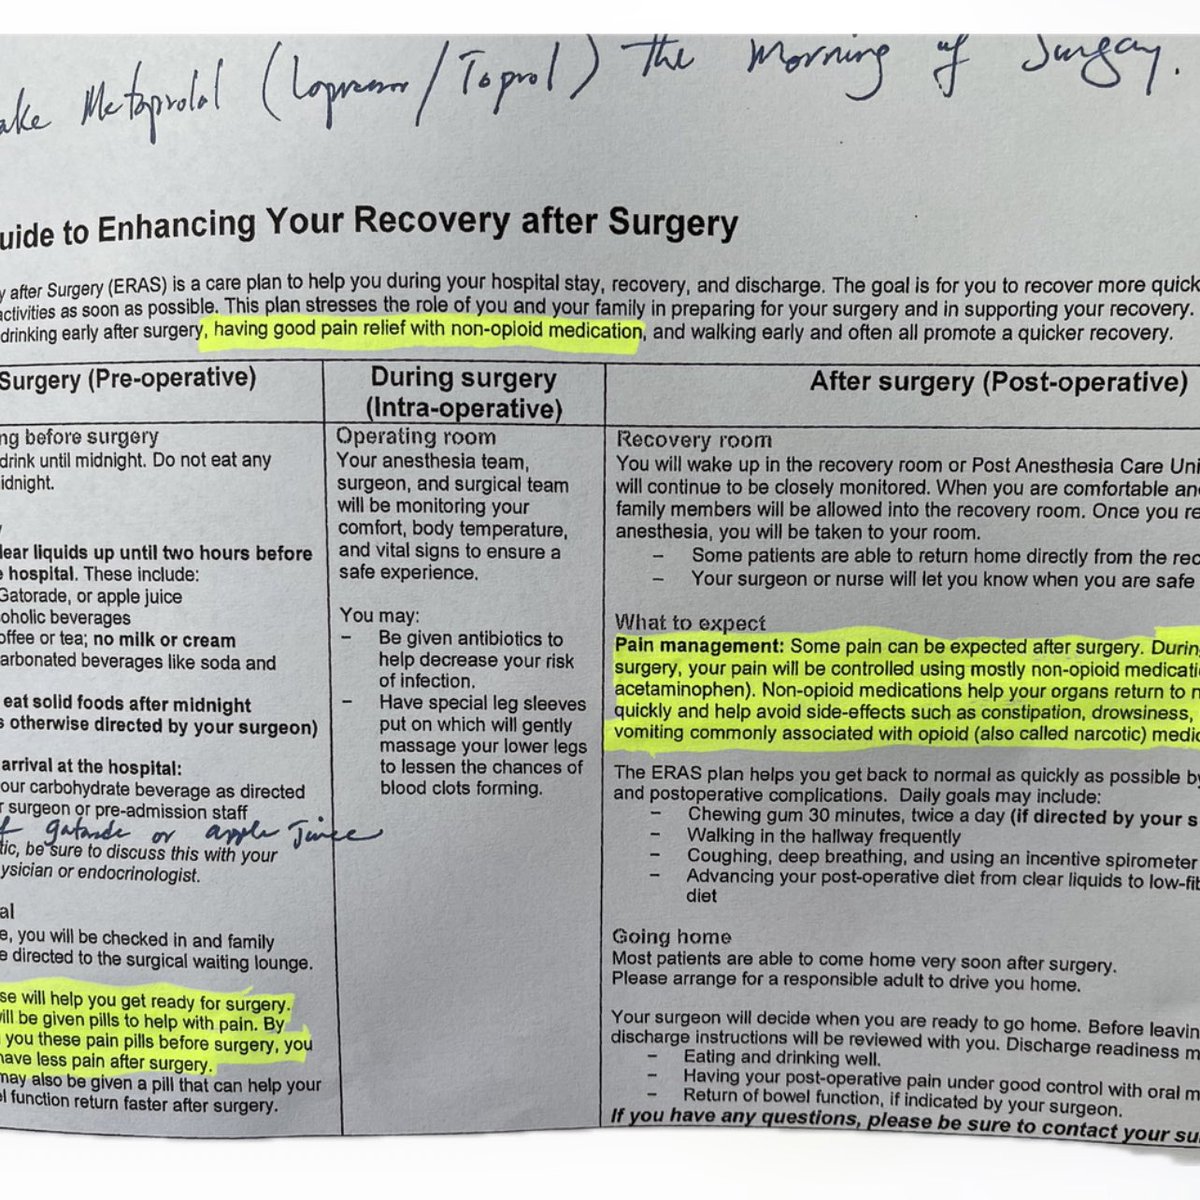 Patient cancels surgery after learning Yale New Haven Health does not treat pain postoperatively.

Pain management includes chewing gum

ERAS = torture